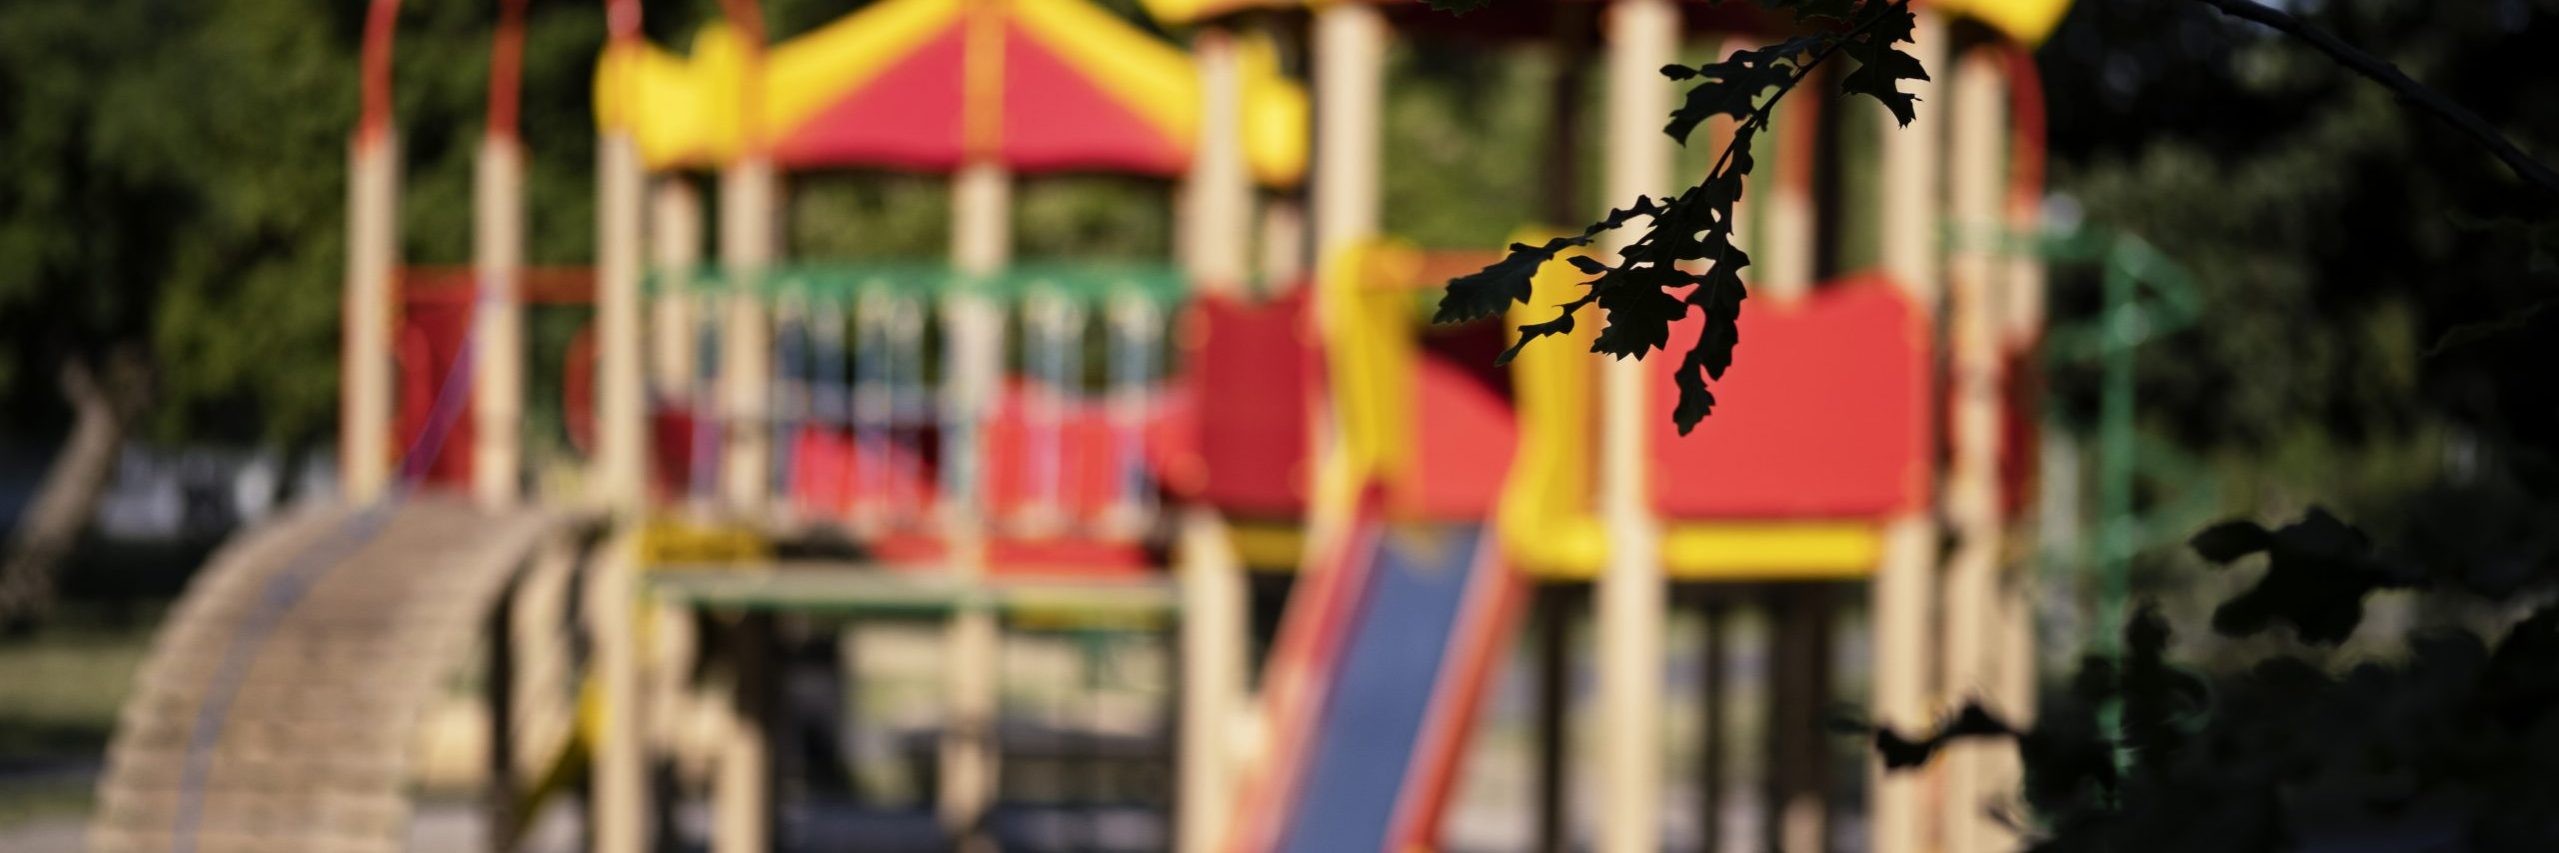 Four toddlers have suffered critical injuries from a knife attack while playing in a park in Annecy, France.